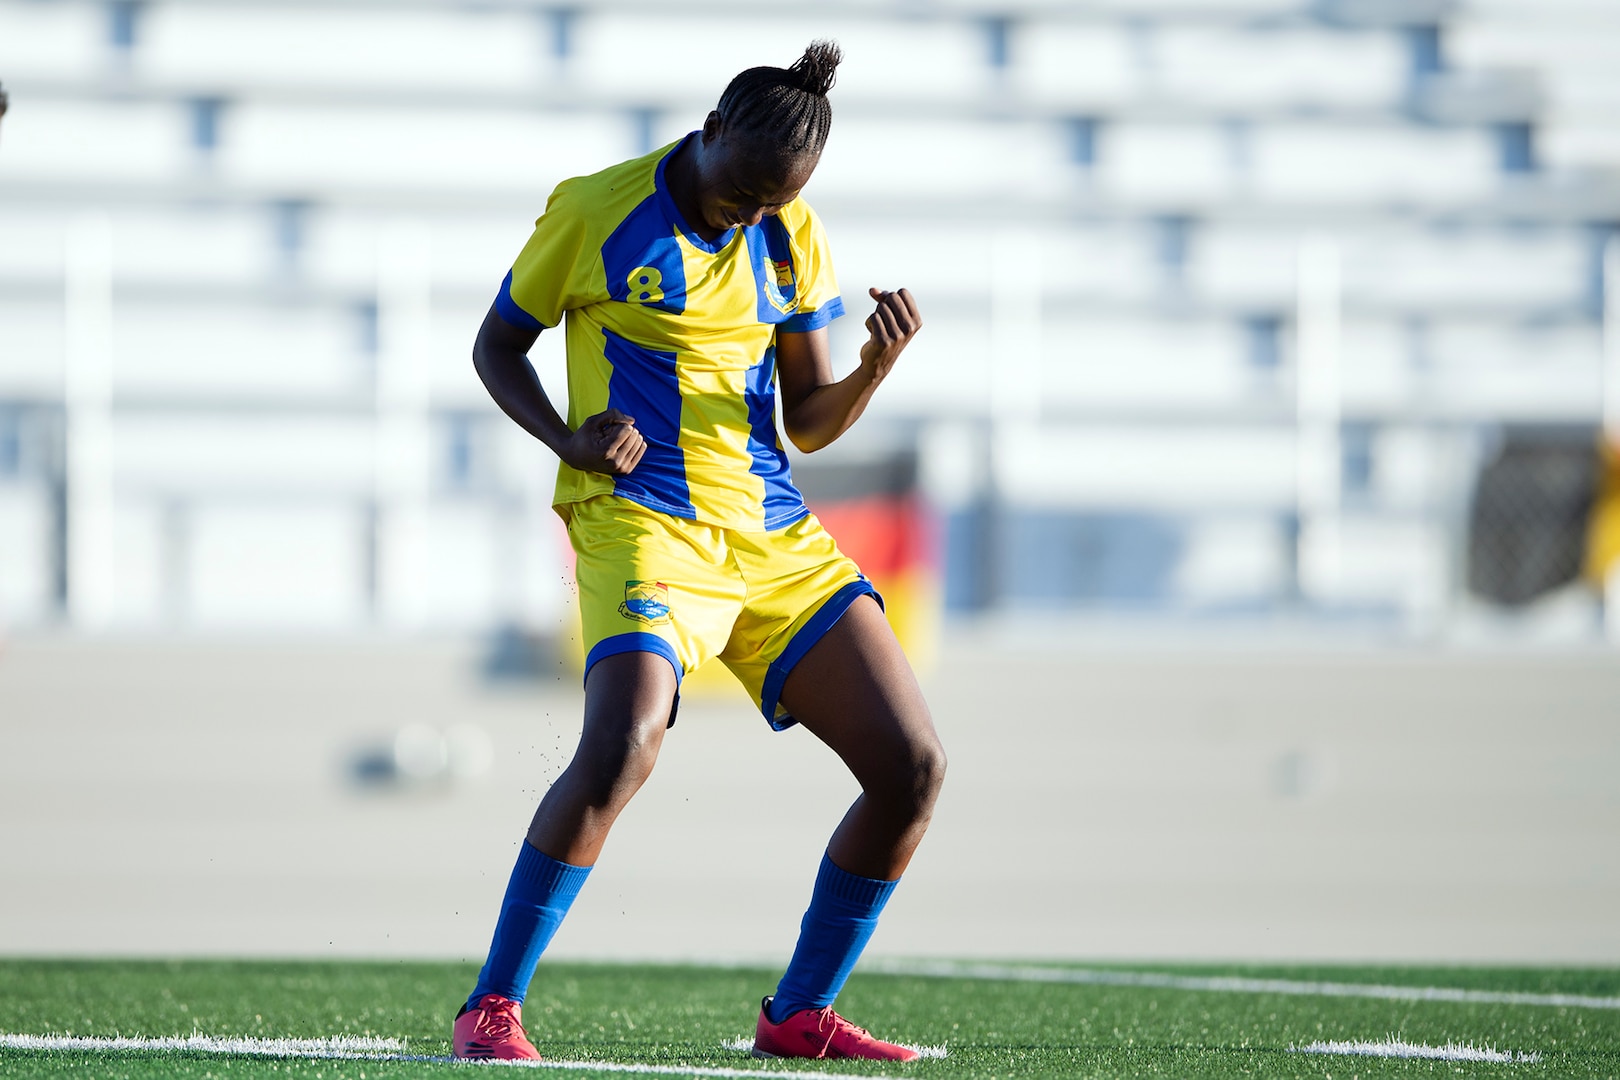 Mali’s Noutenin Bagayogo celebrates her goal against Canada during the 13th CISM (International Military Sports Council) World Military Women’s Football Championship in Meade, Washington July 20, 2022. (DoD photo by EJ Hersom)